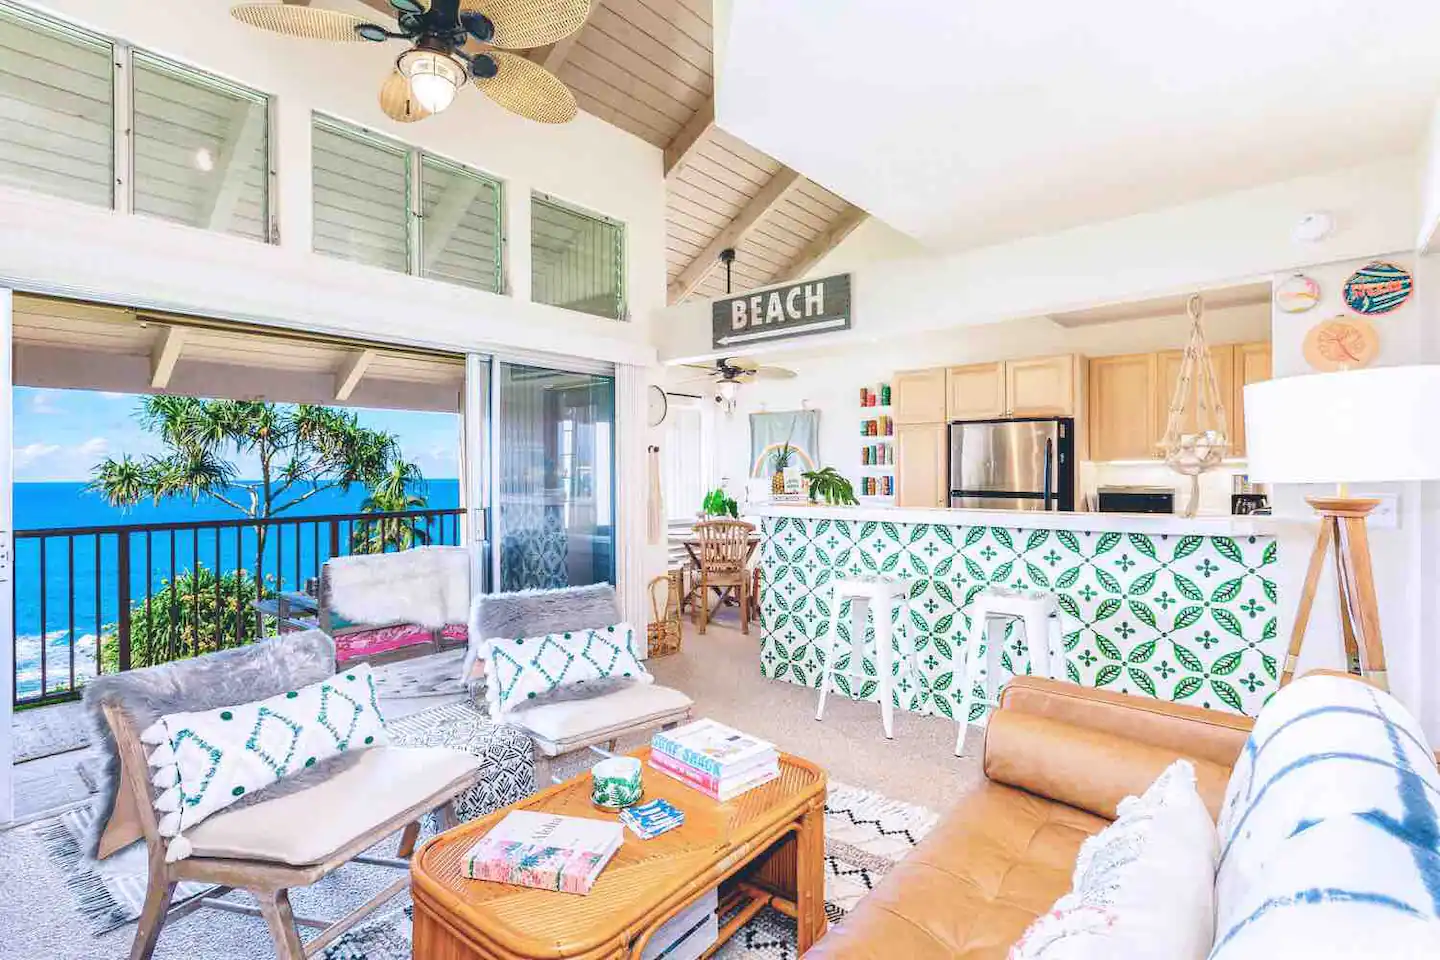 The Surf Shack, one of the best Airbnbs in Hawaii, pictured from the living room